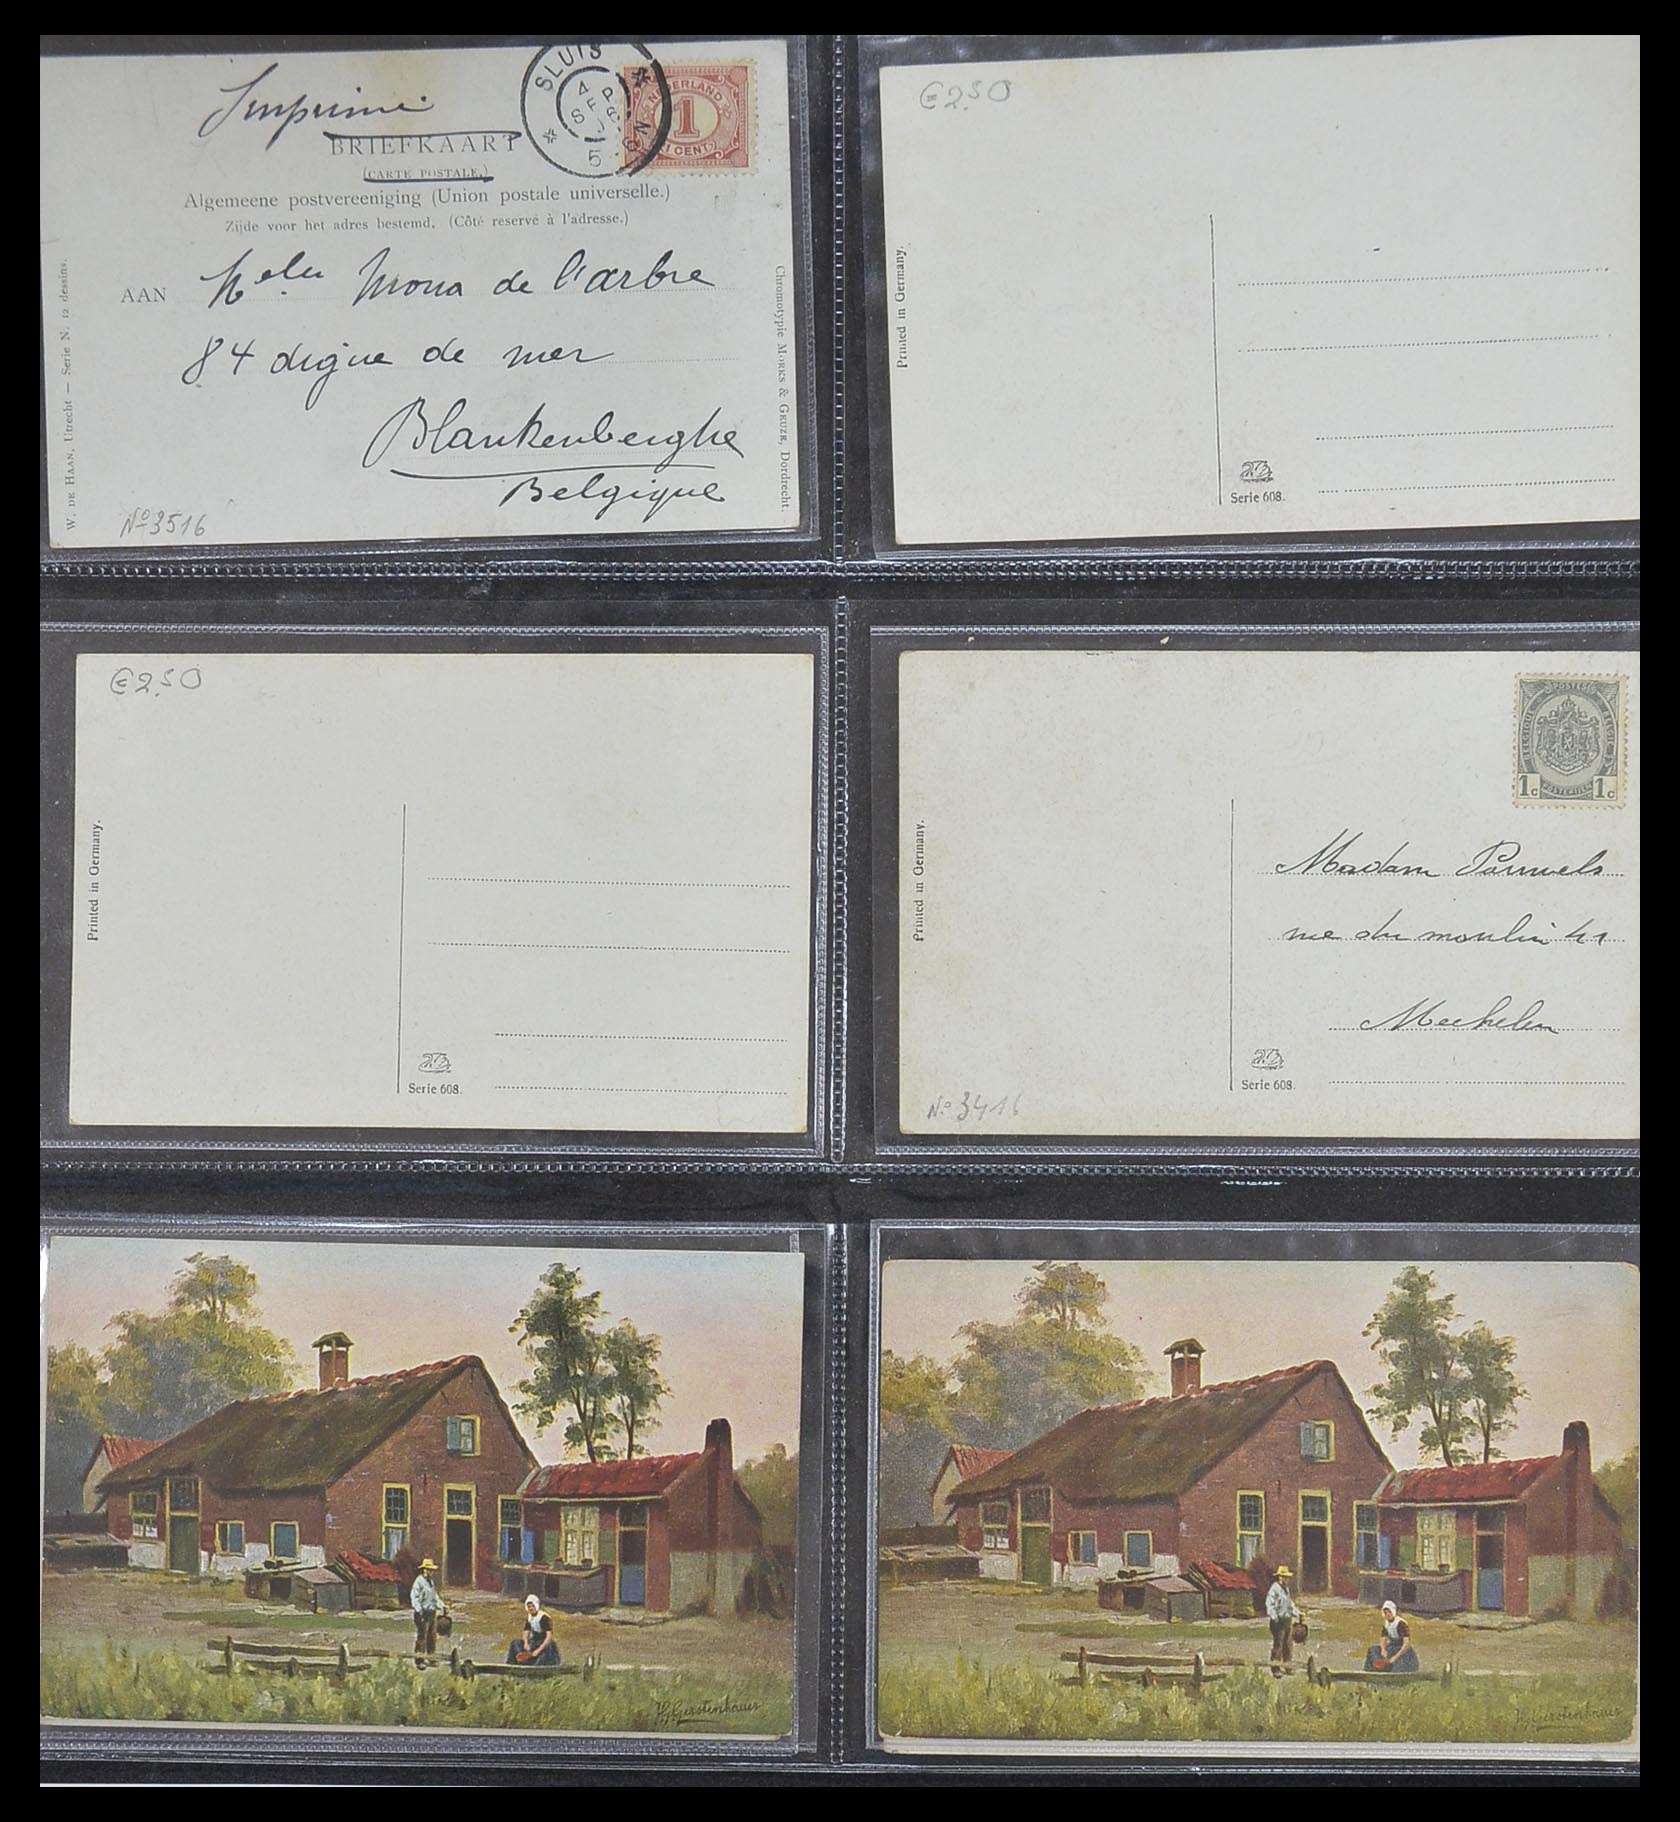 33928 042 - Stamp collection 33928 Netherlands picture postcards 1910-1930.